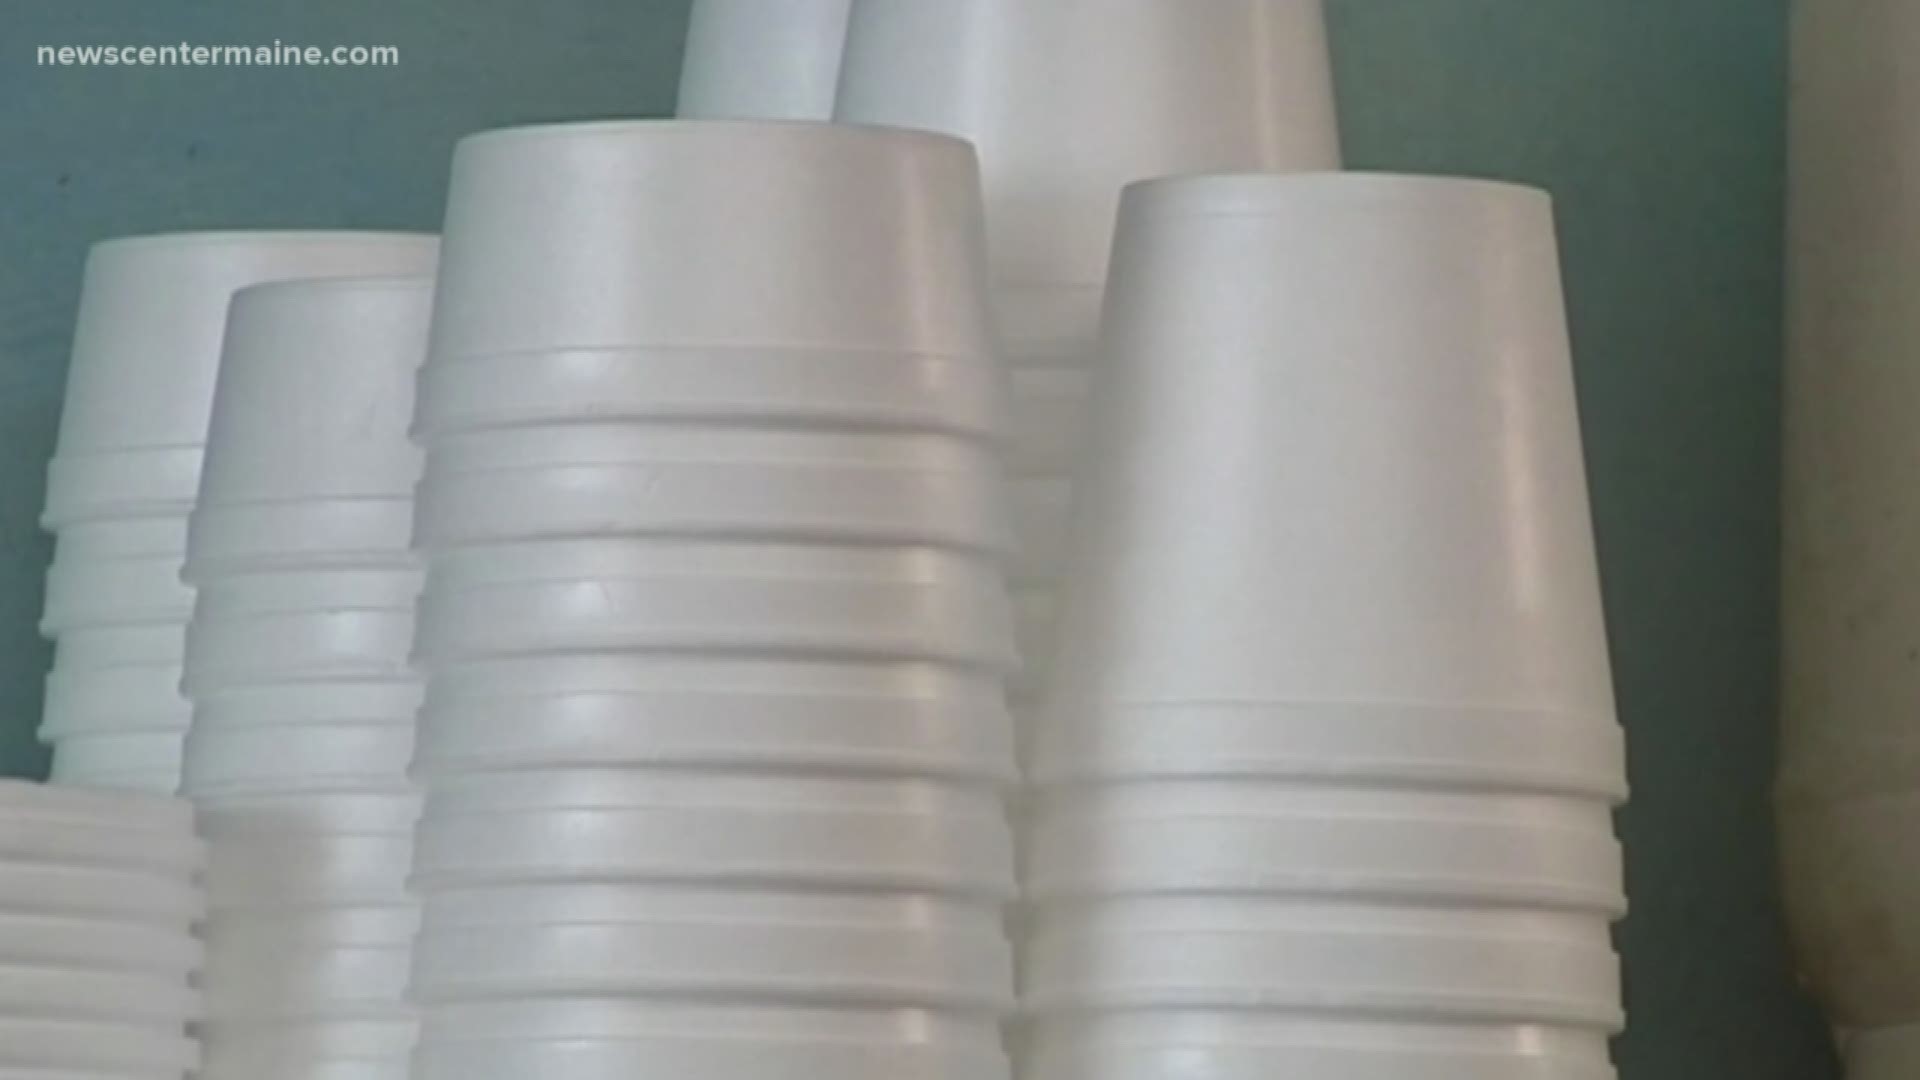 Businesses in the Bangor area are making moves to be ready for Jan. 1, when styrofoam containers will no longer be legal in the city.